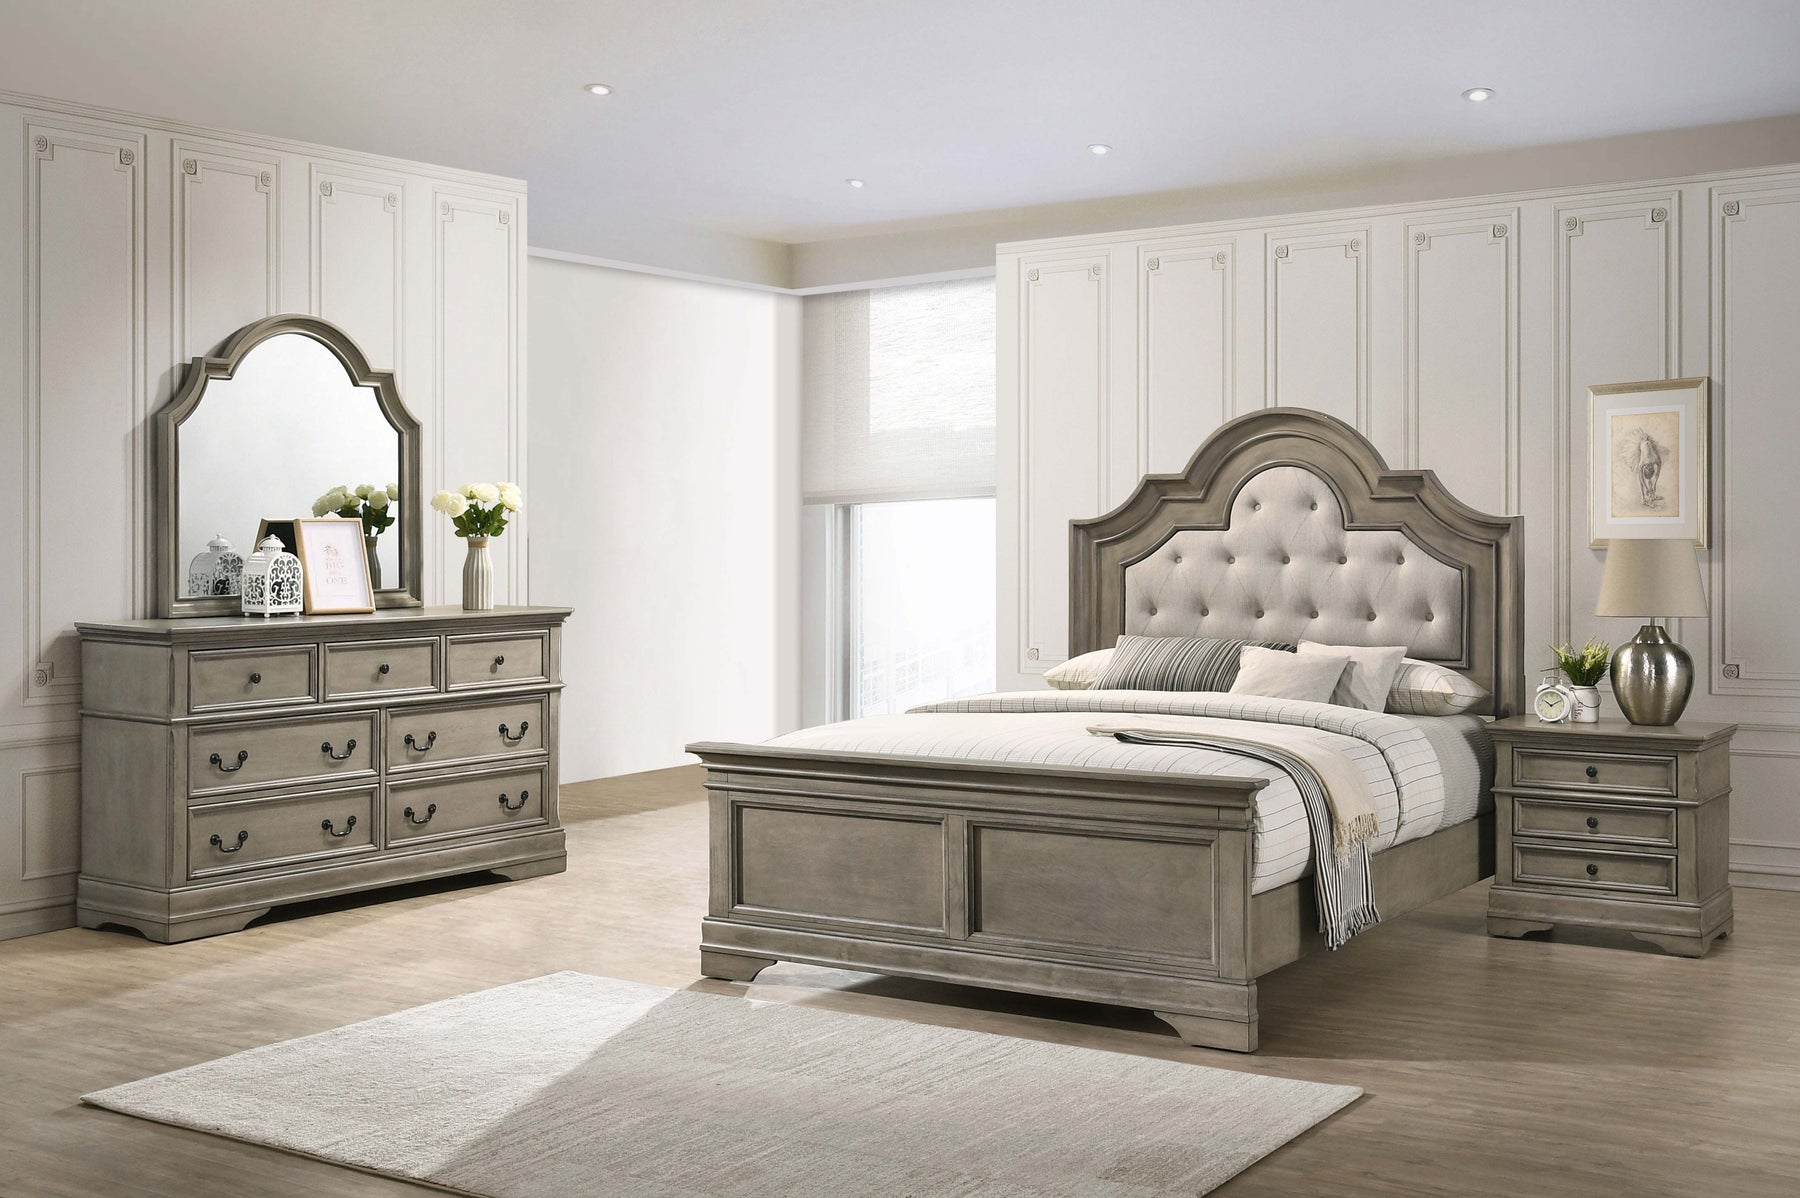 Manchester Bedroom Set with Upholstered Arched Headboard Wheat - Half Price Furniture